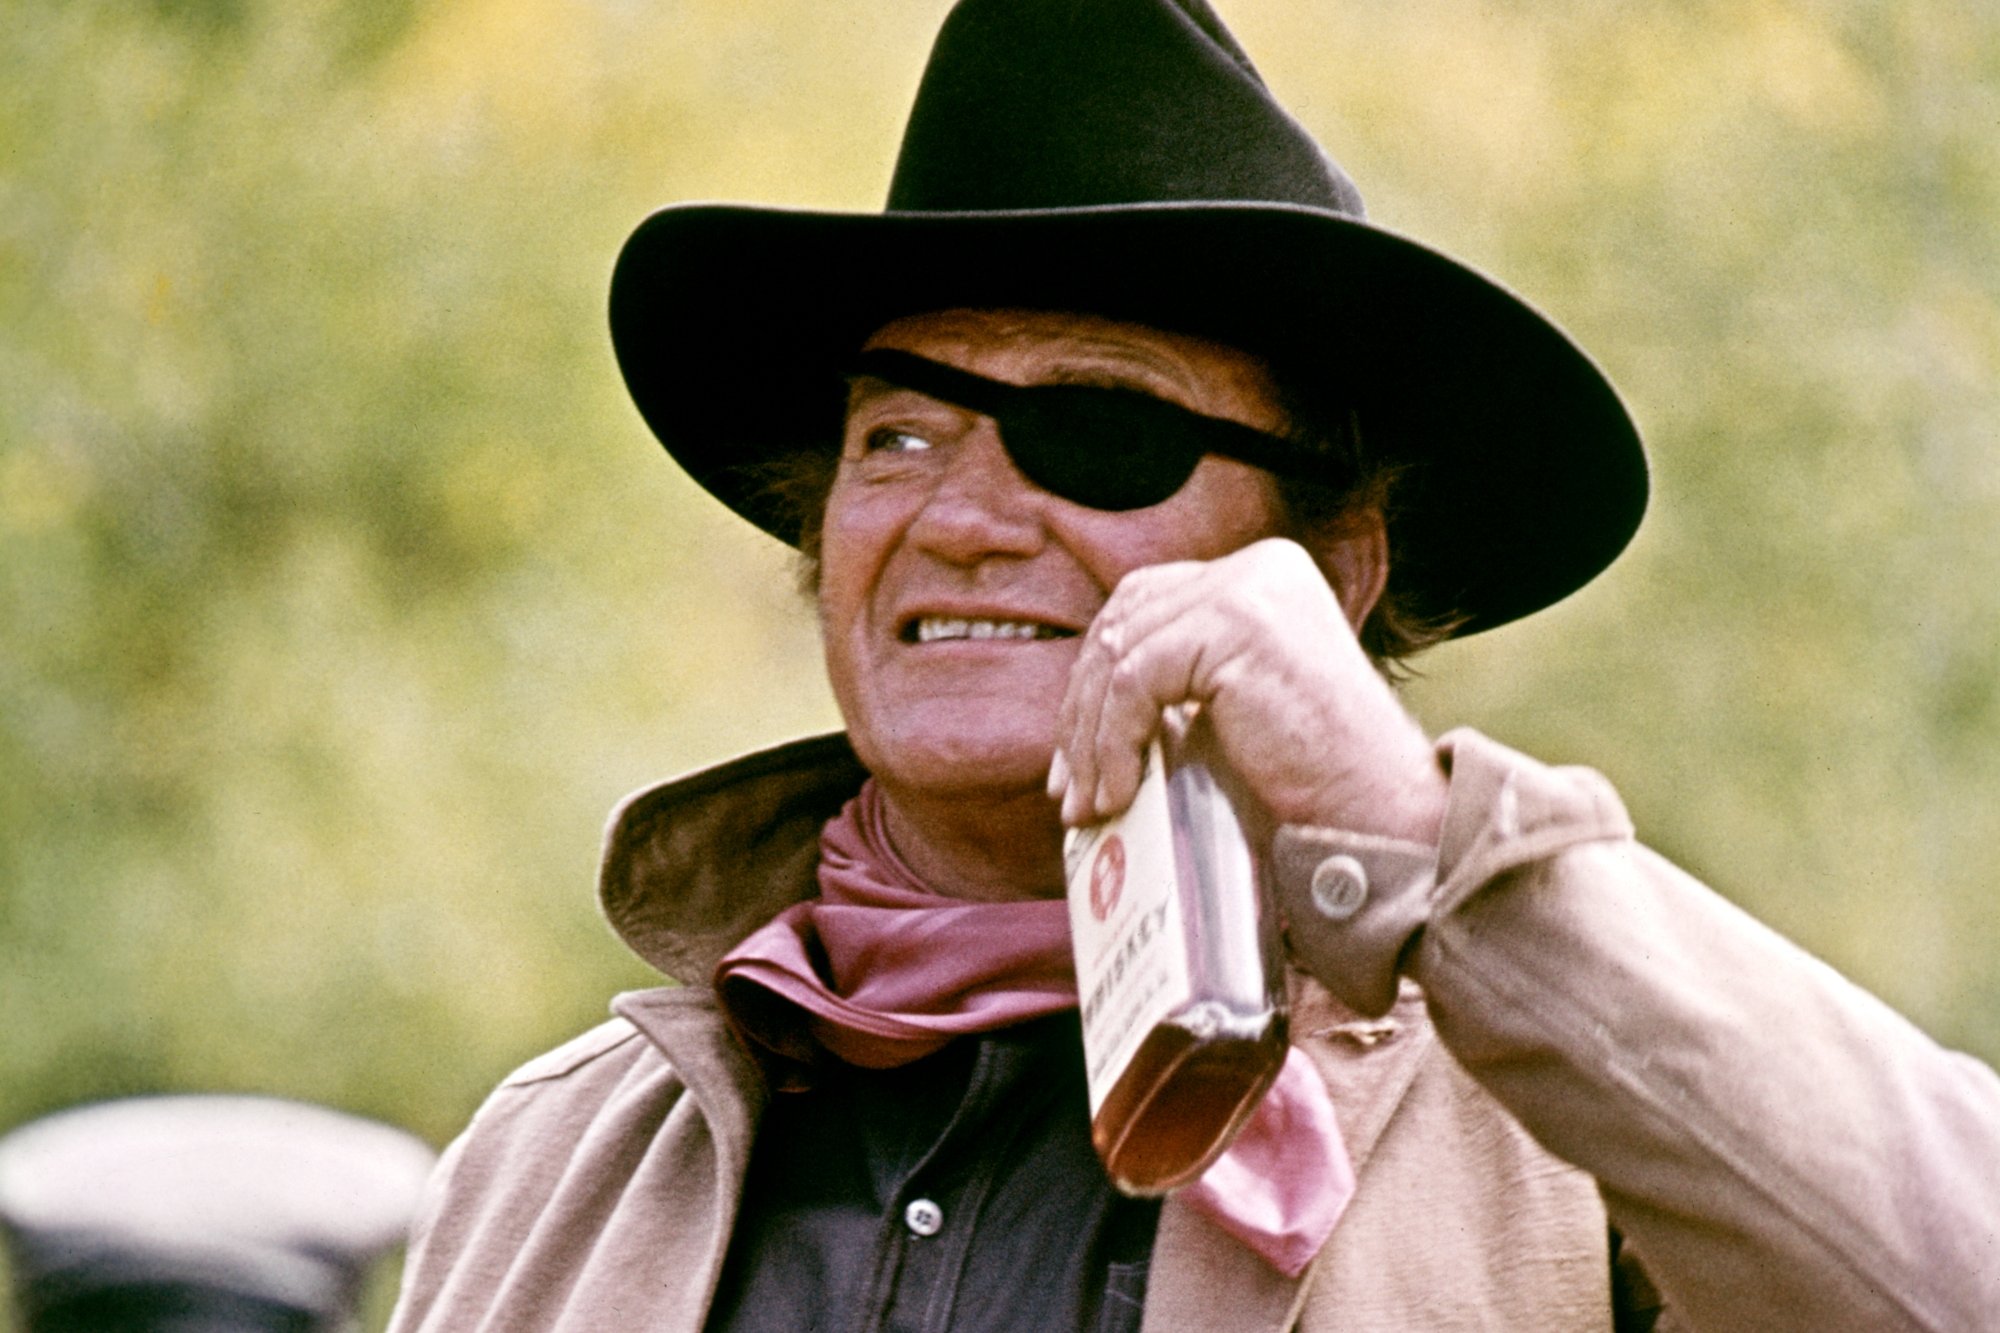 'True Grit' John Wayne as Rooster Cogburn smiling, holding up a bottle of booze. He's wearing a cowboy hat and wearing an eyepatch over his eye.